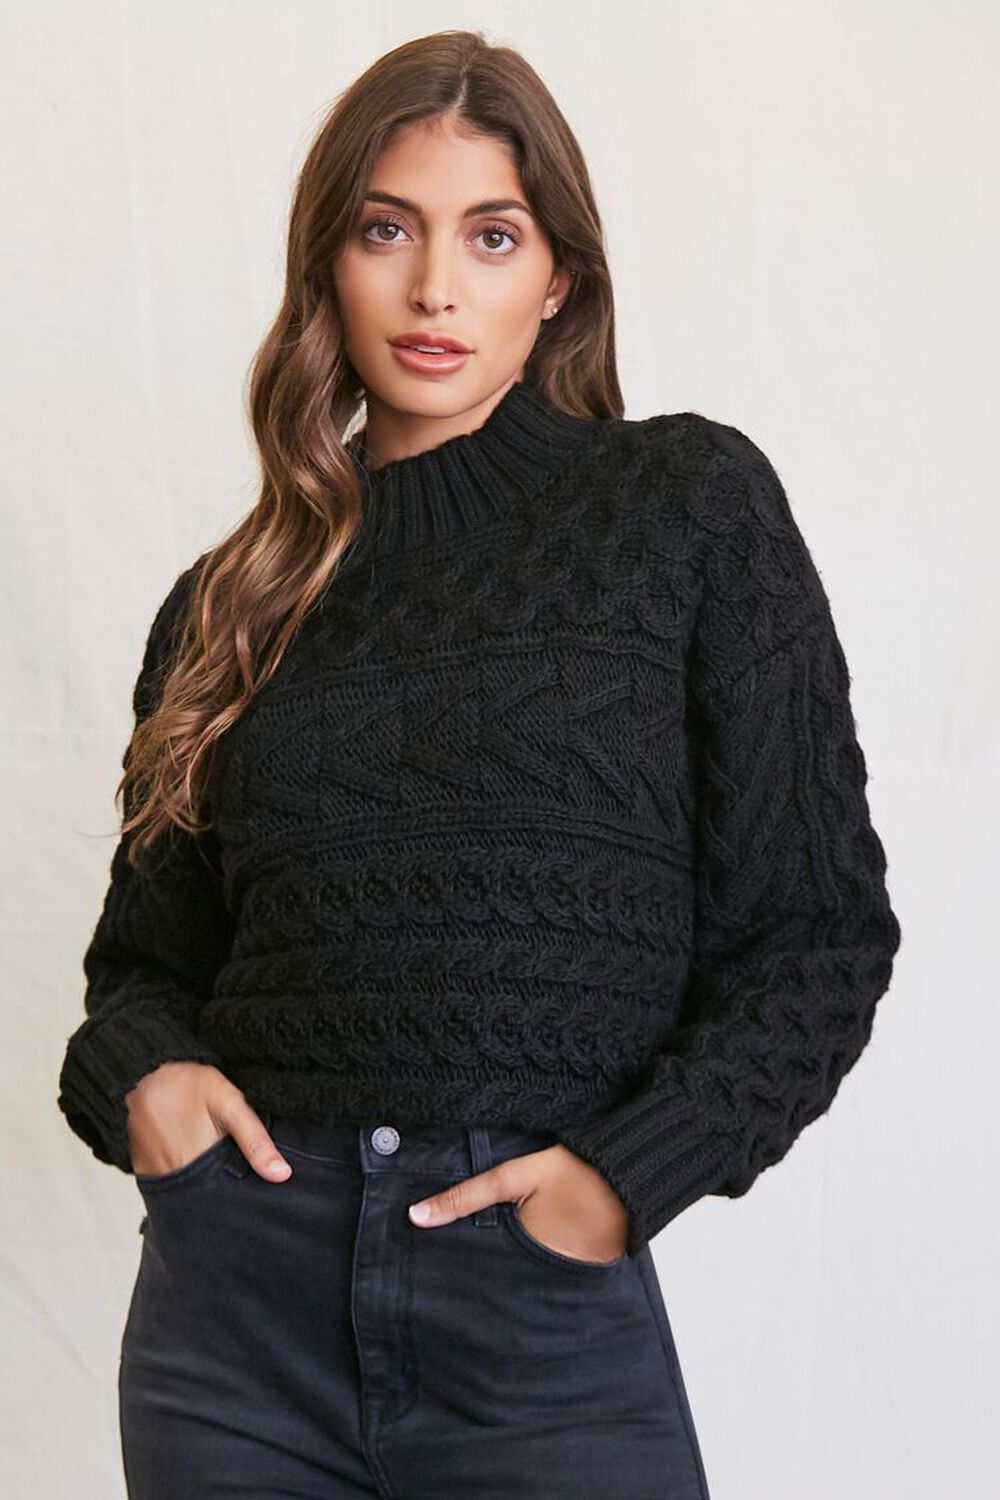 BLACK Cable Knit Mock Neck Sweater, image 1